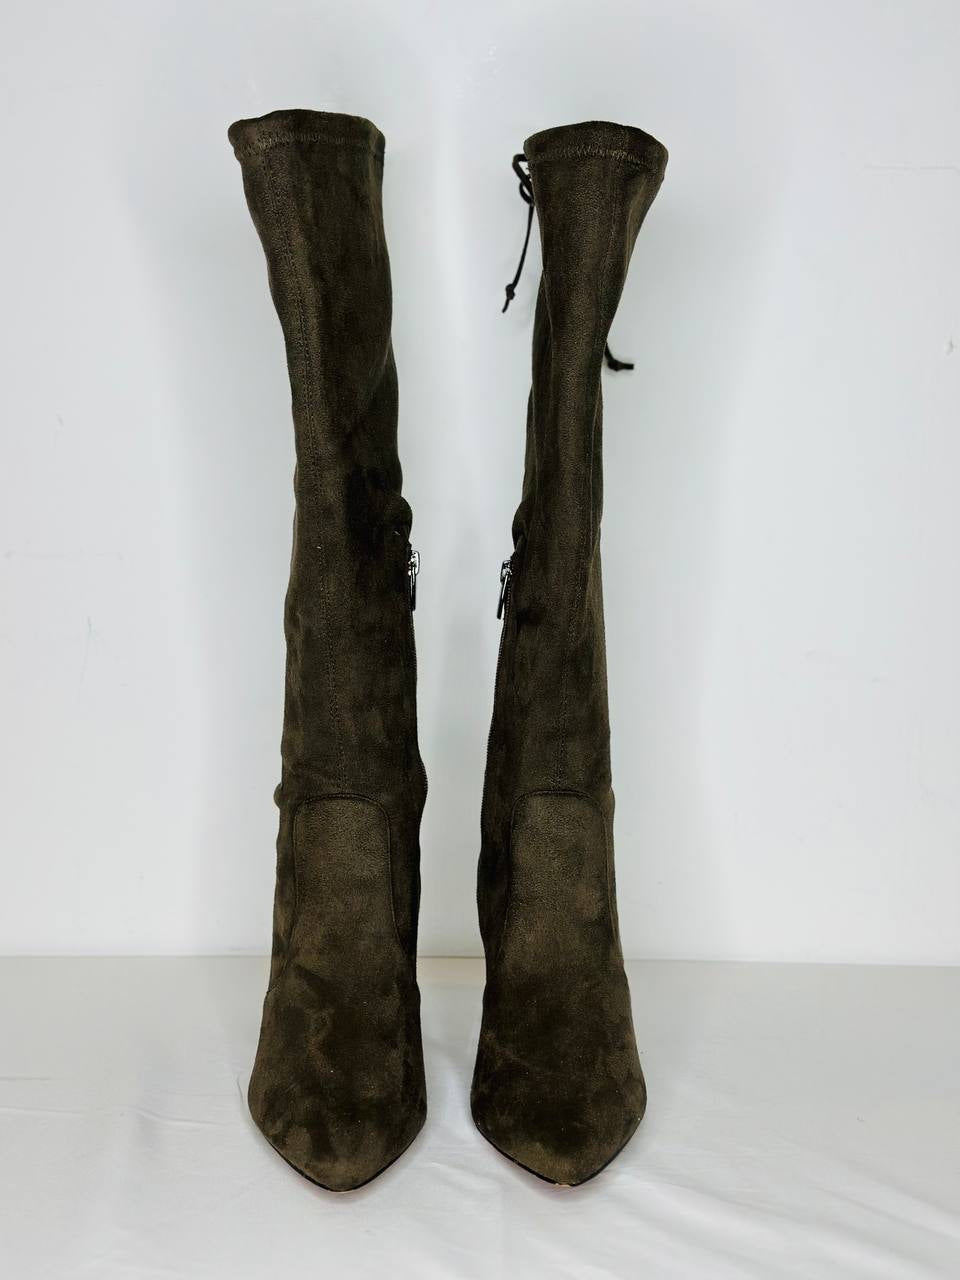 Vince Camuto boots